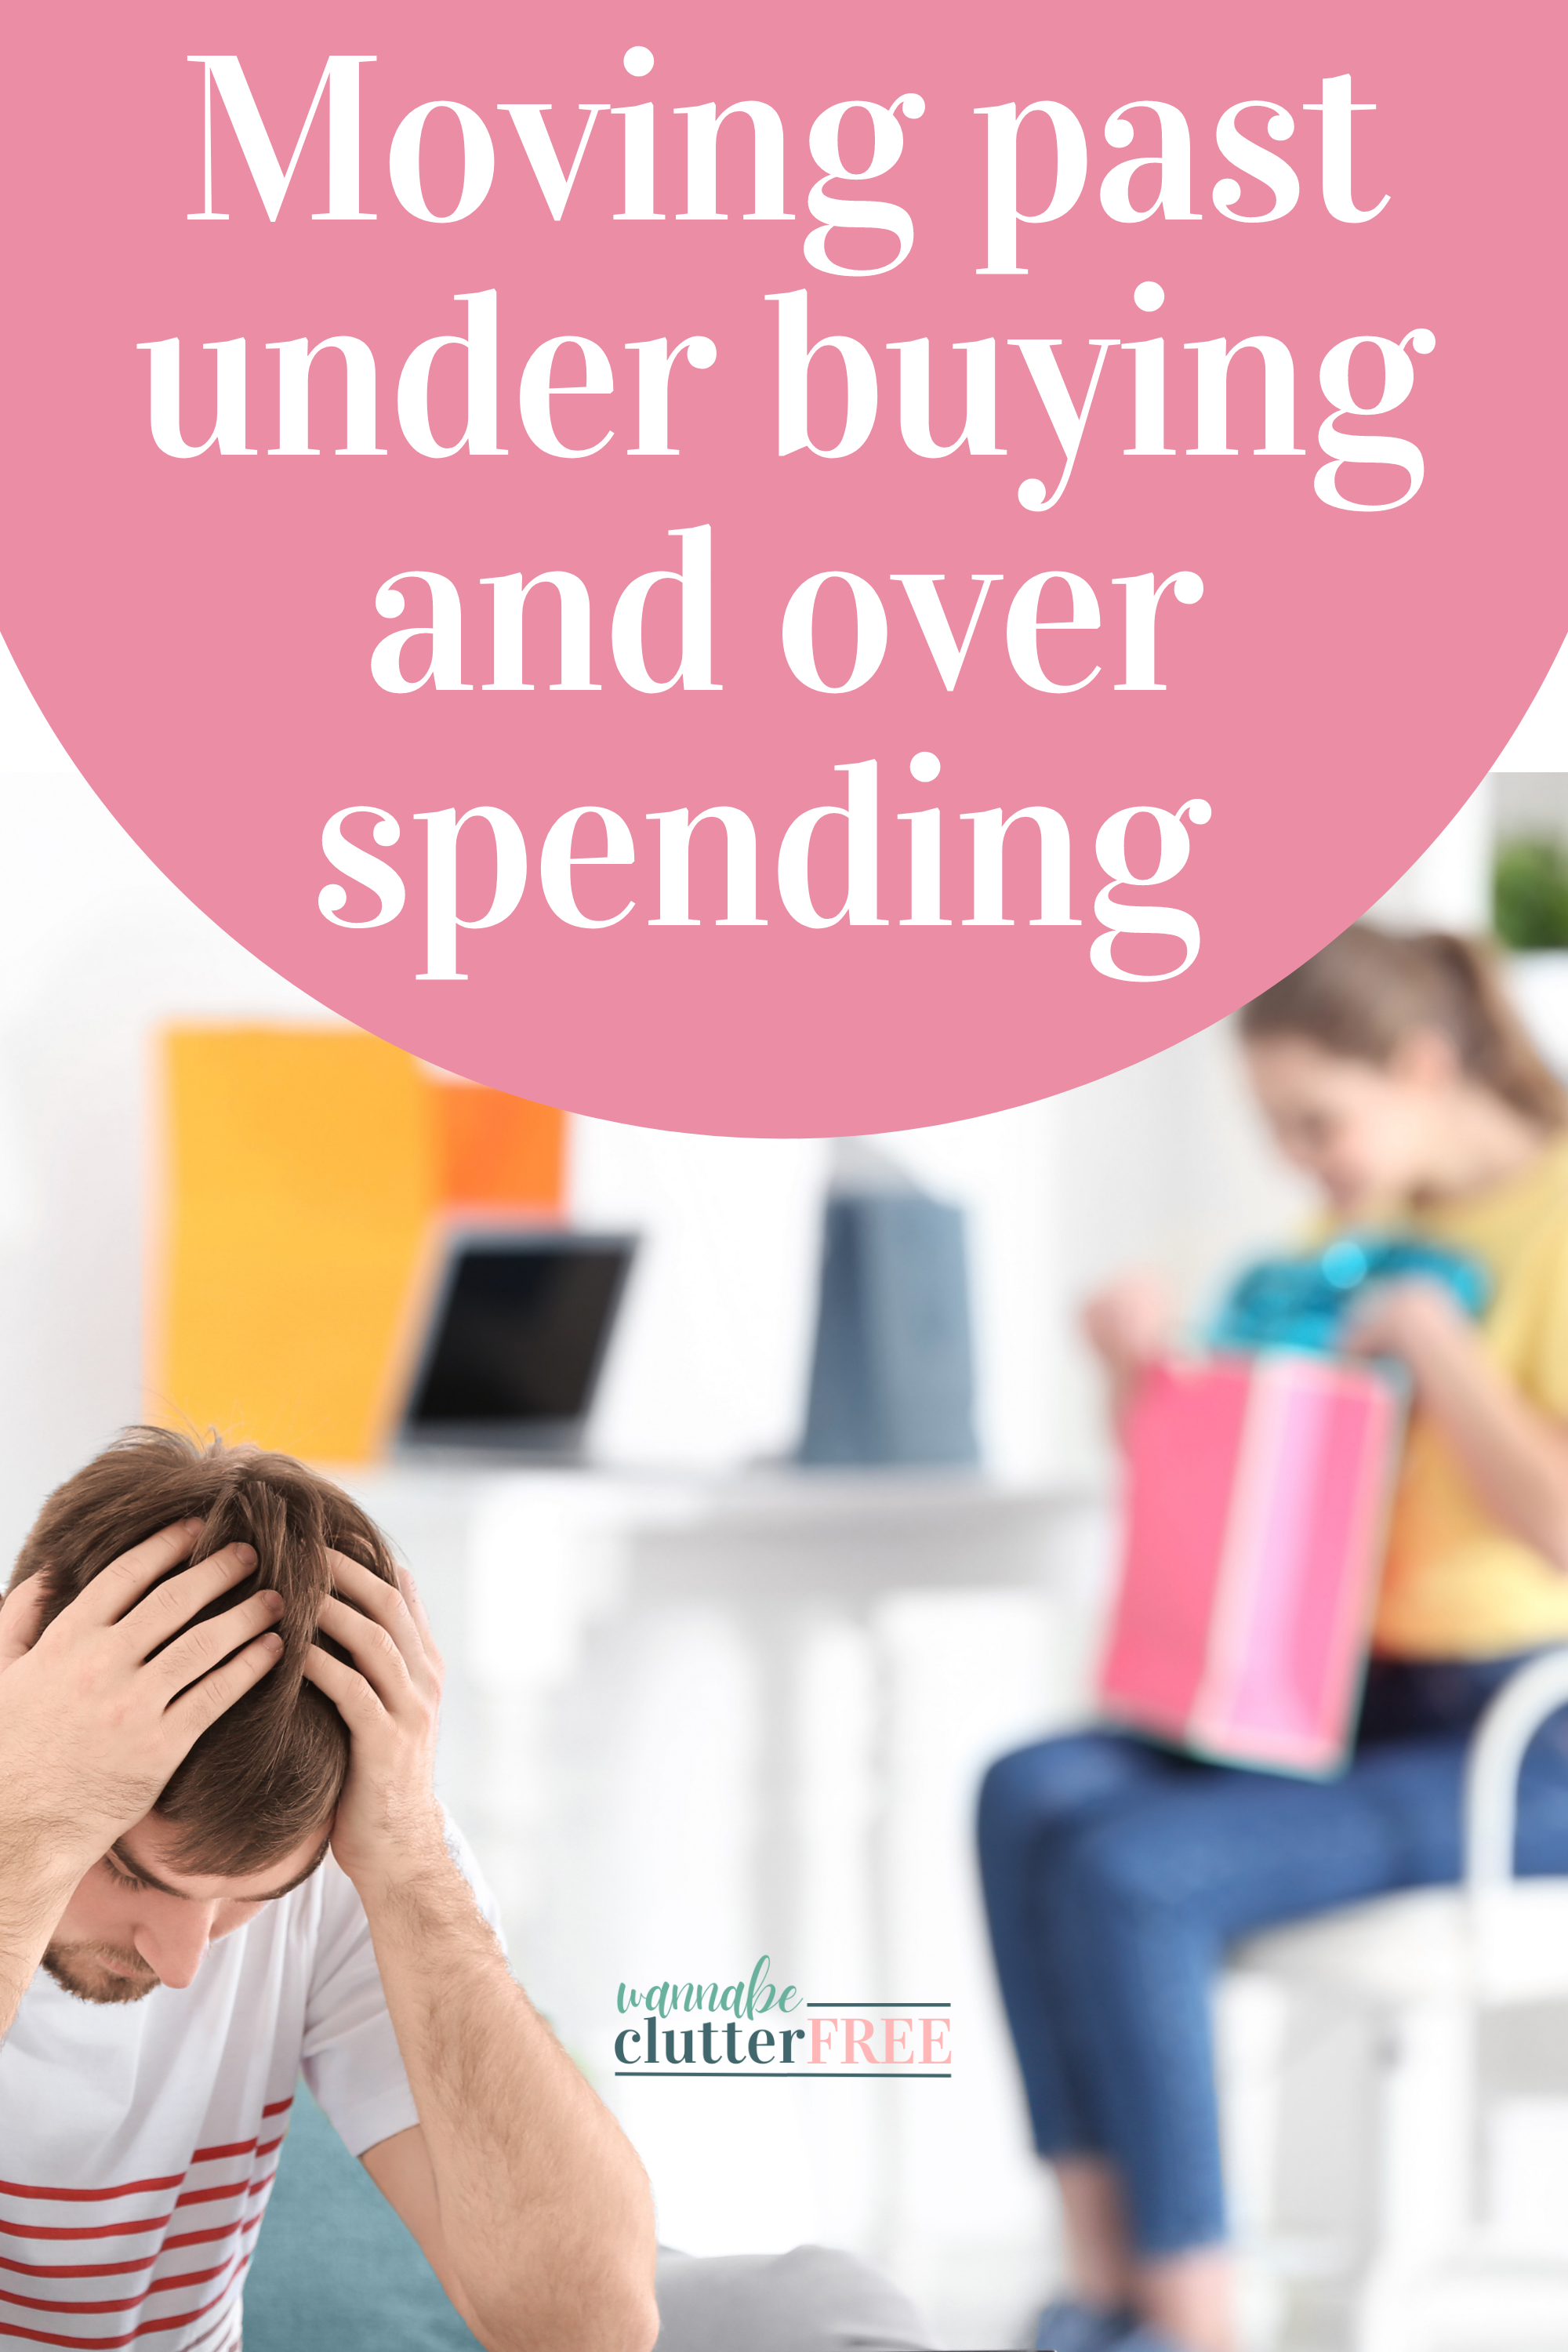 Moving Past Under Buying and Over Spending